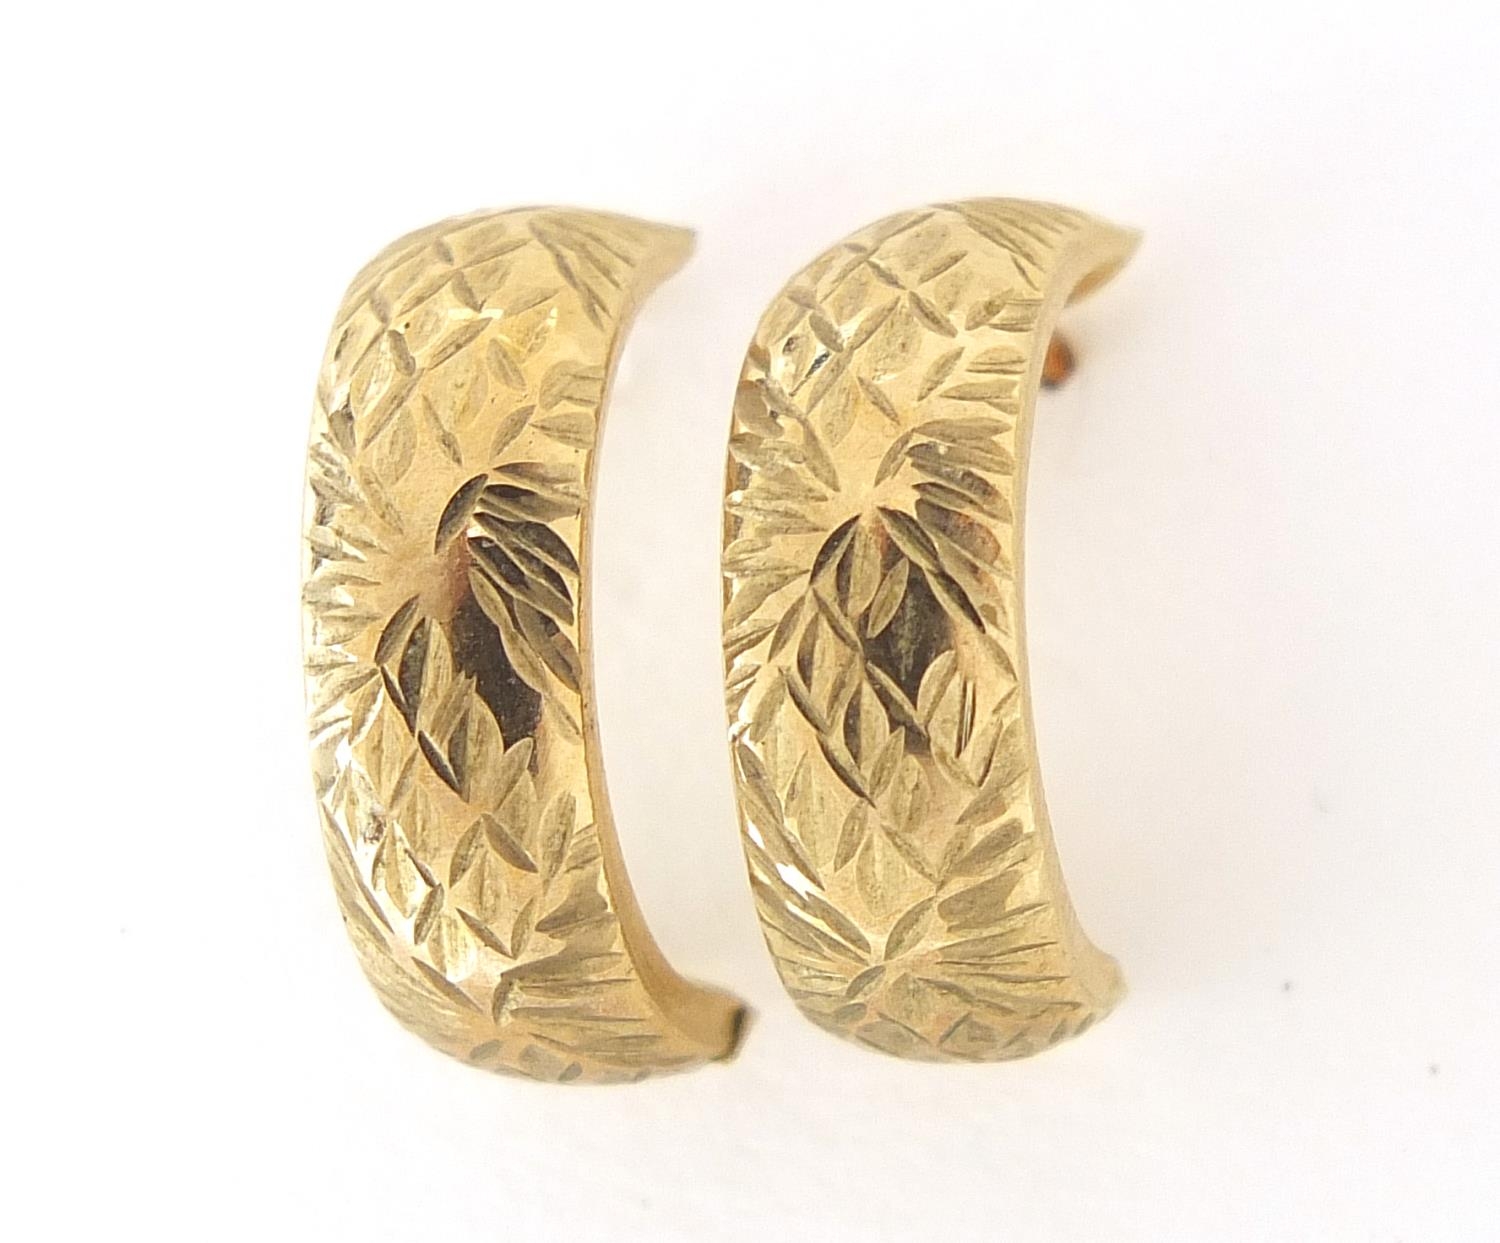 Pair of 9ct gold half hoop earrings with engraved decoration, 1.4cm high, 0.6g : For Further